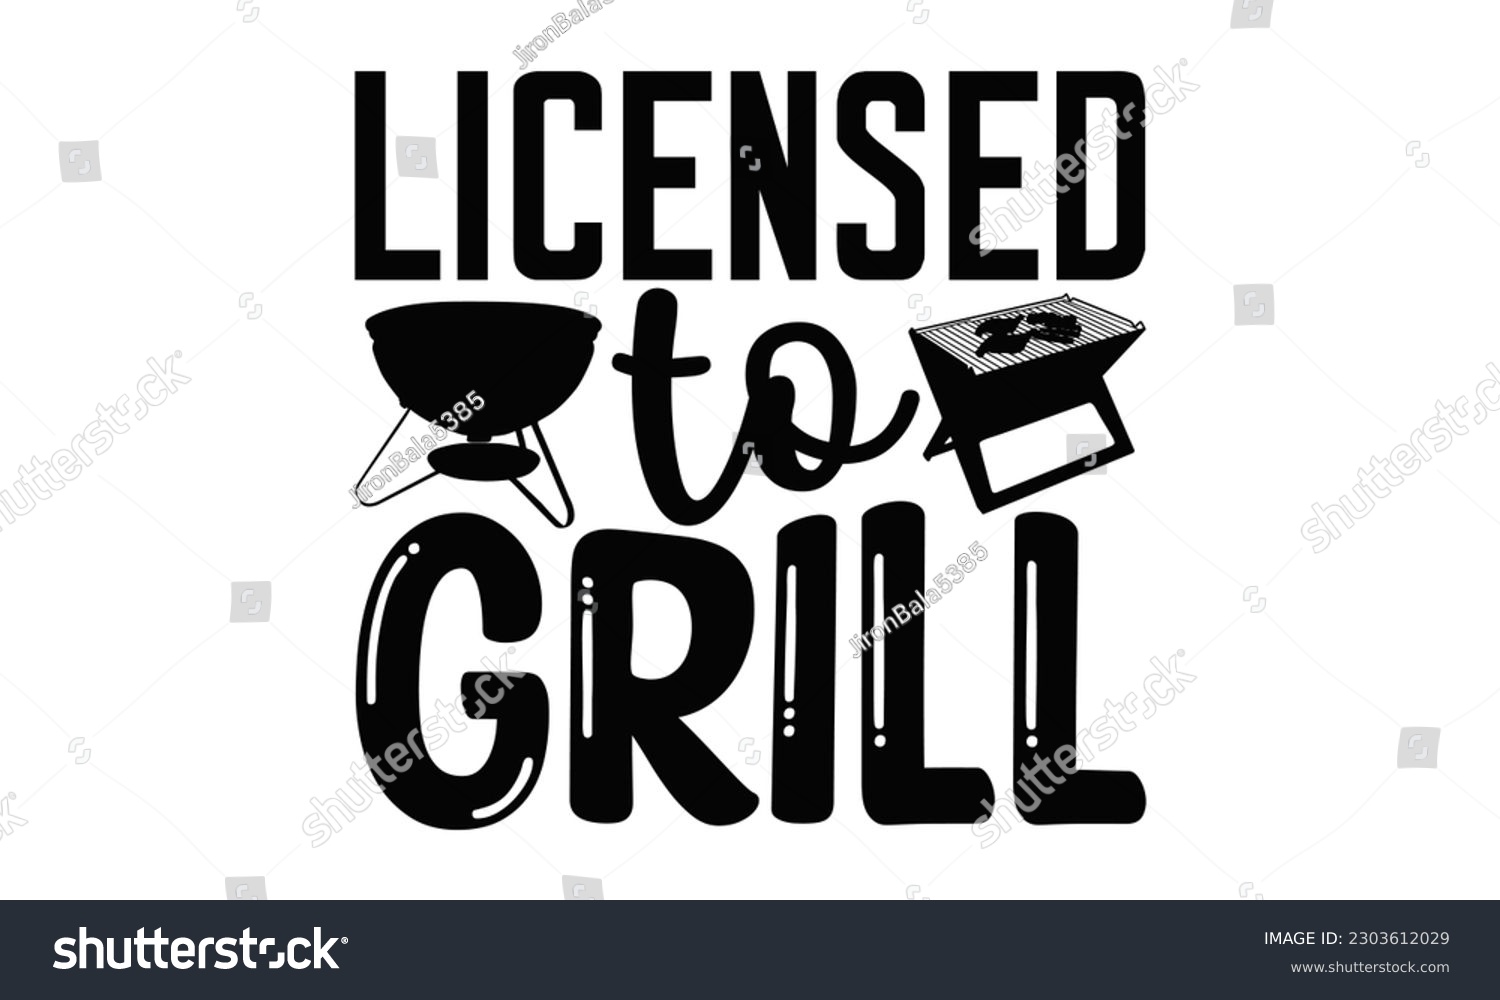 SVG of Licensed To Grill - Barbecue SVG Design, Hand drawn vintage illustration with hand-lettering and decoration elements with, SVG Files for Cutting.
 svg